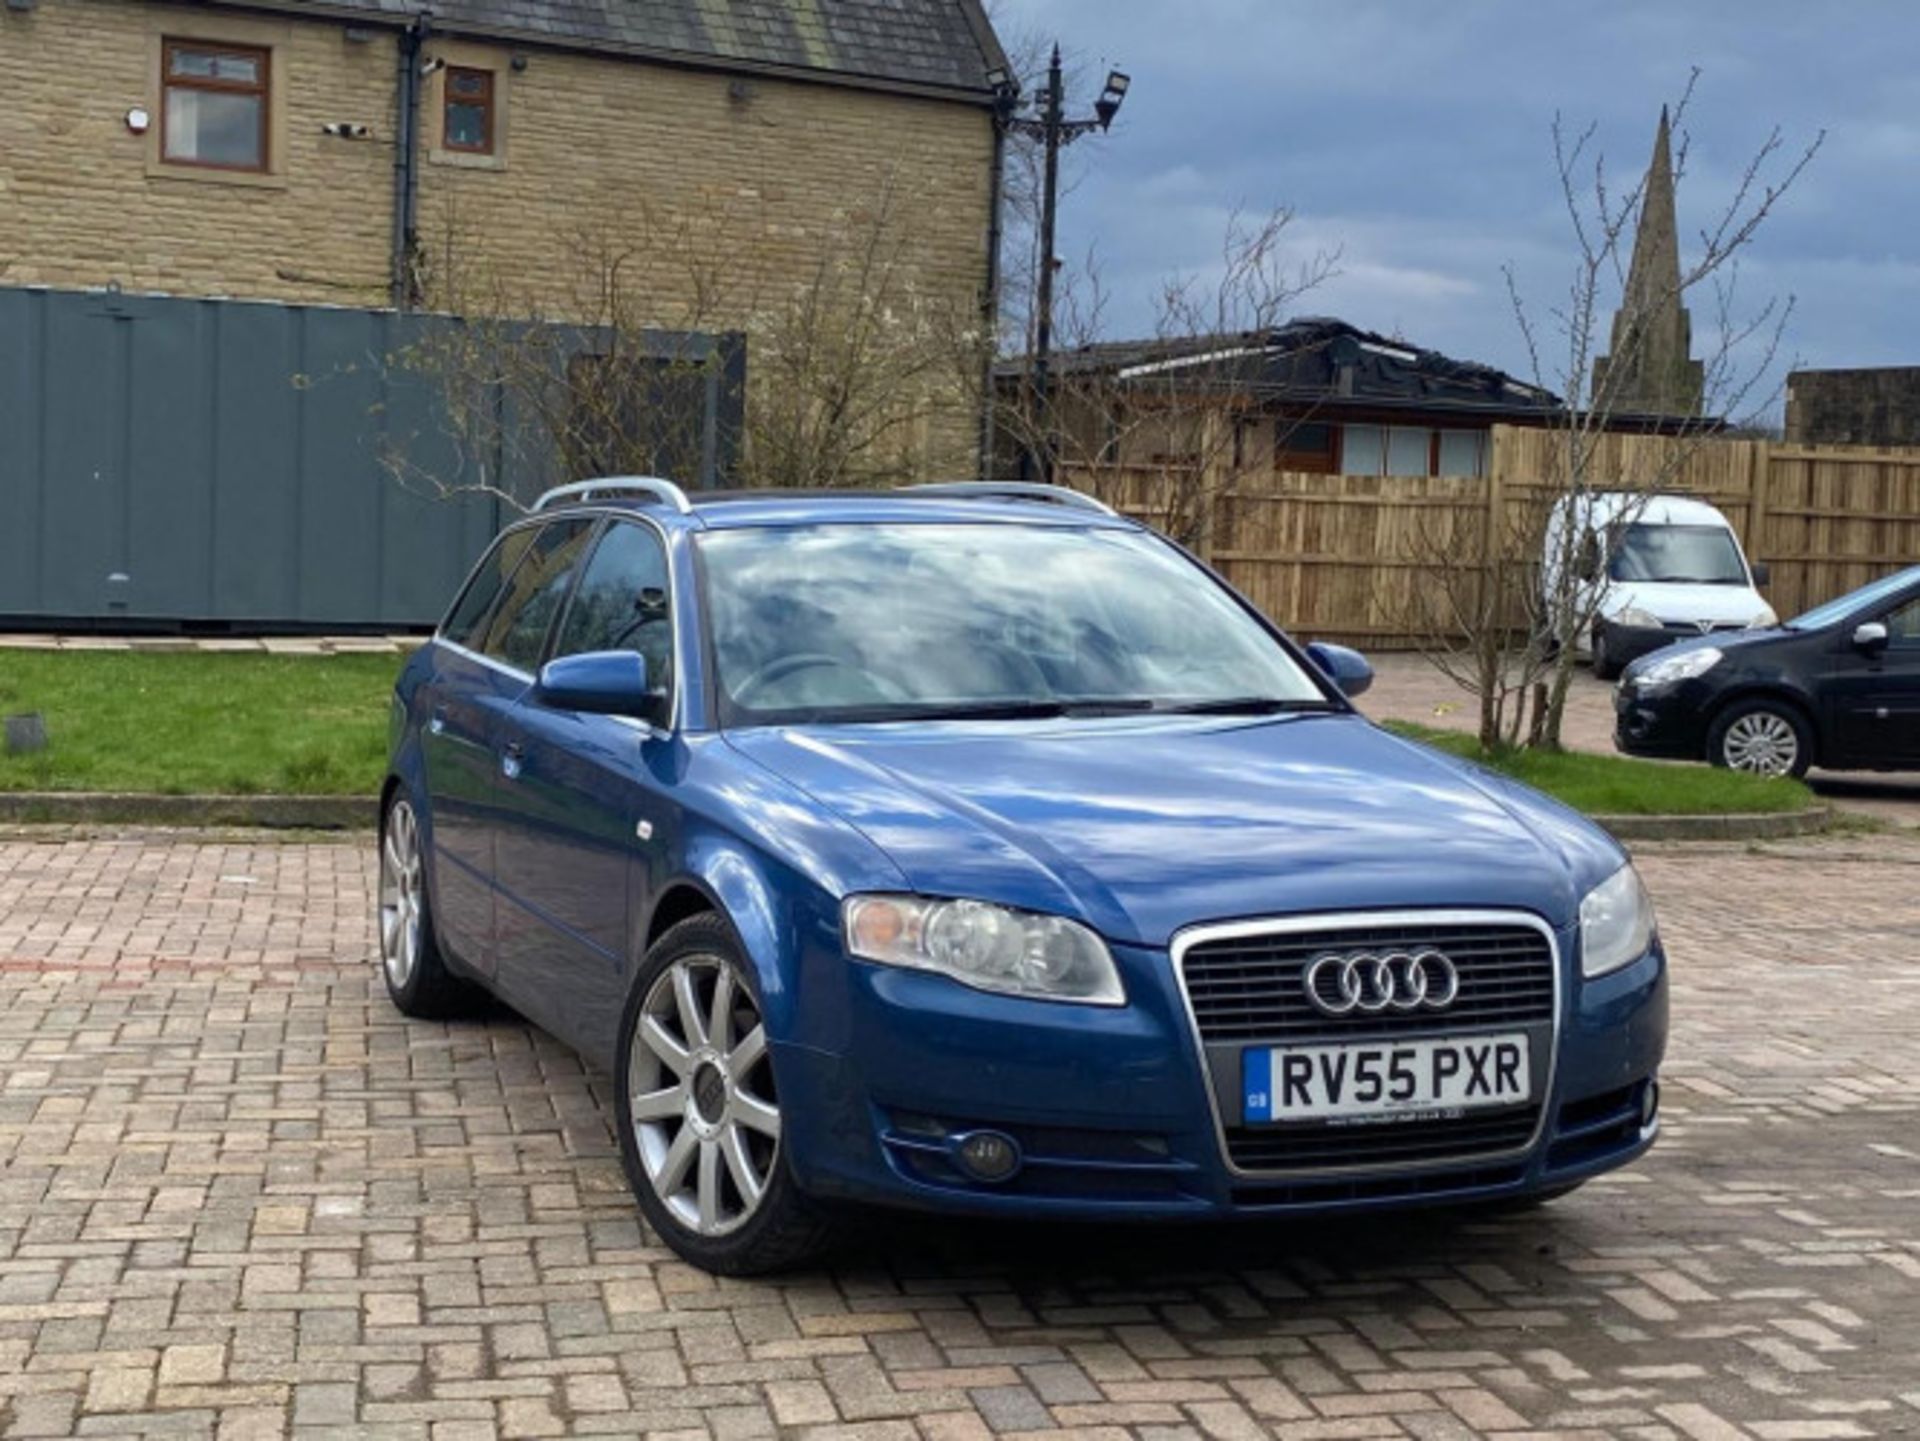 AUDI A4 AVANT 1.9 TDI SE 5DR ESTATE - RARE AND RELIABLE LUXURY WAGON >>--NO VAT ON HAMMER--<< - Image 63 of 63